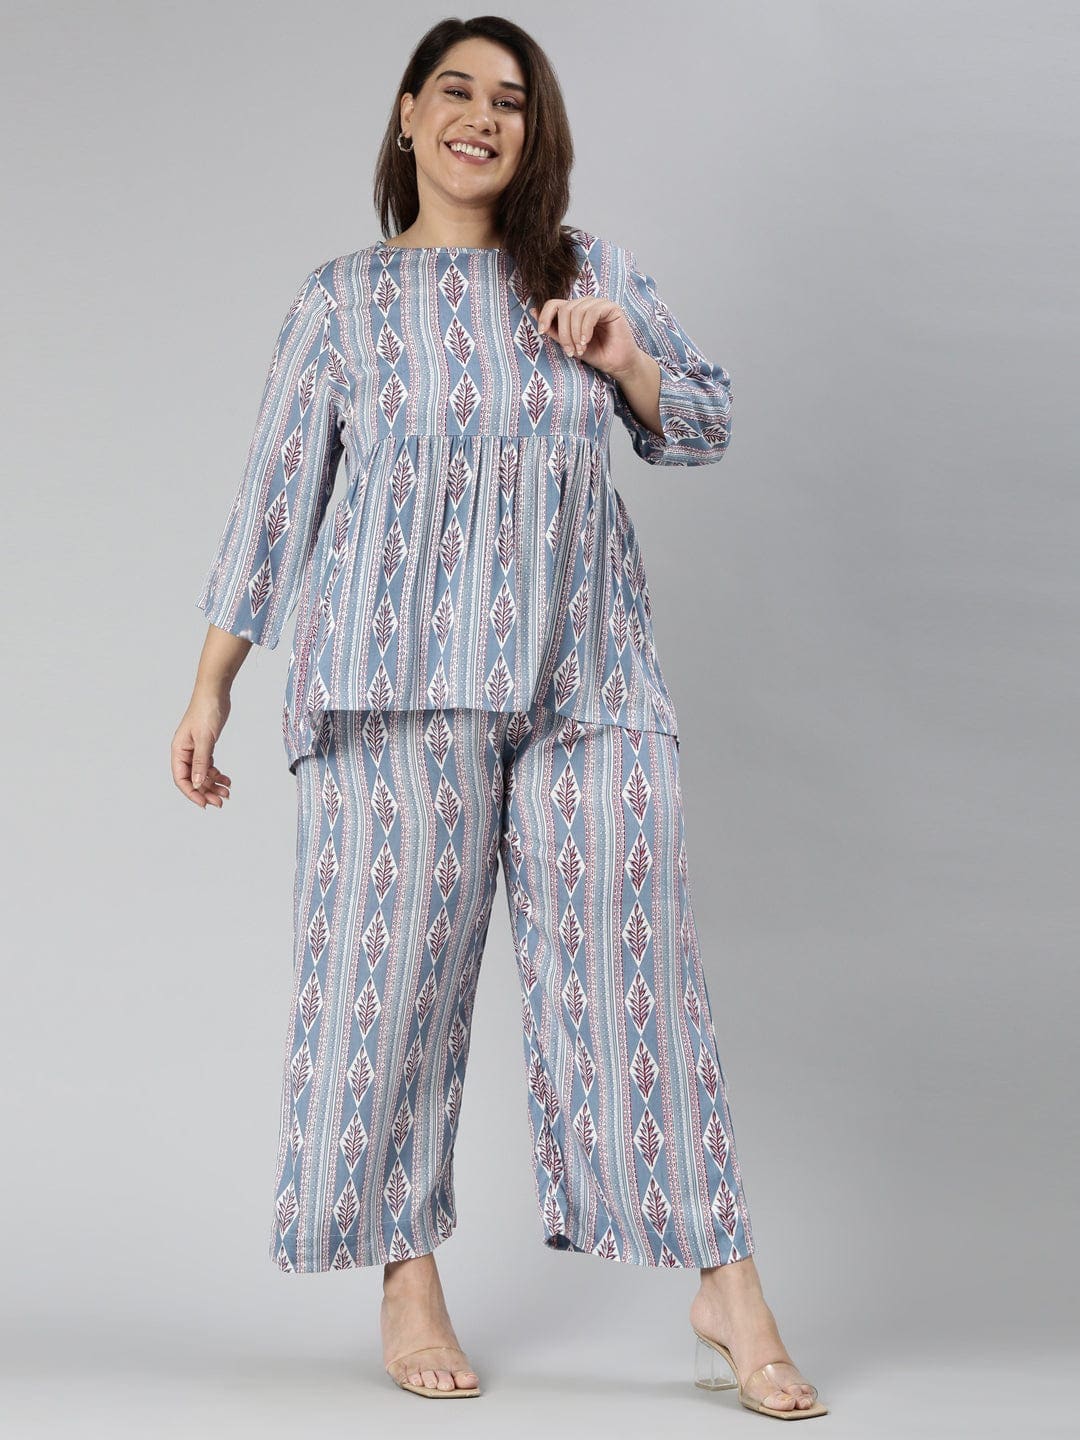 Buy  peplum dress /Women's /Blue ethnic printed /peplum top /palazzo pant on online from the Shailink ethnic printed /peplum top /palazzo pant on online from the Shaili